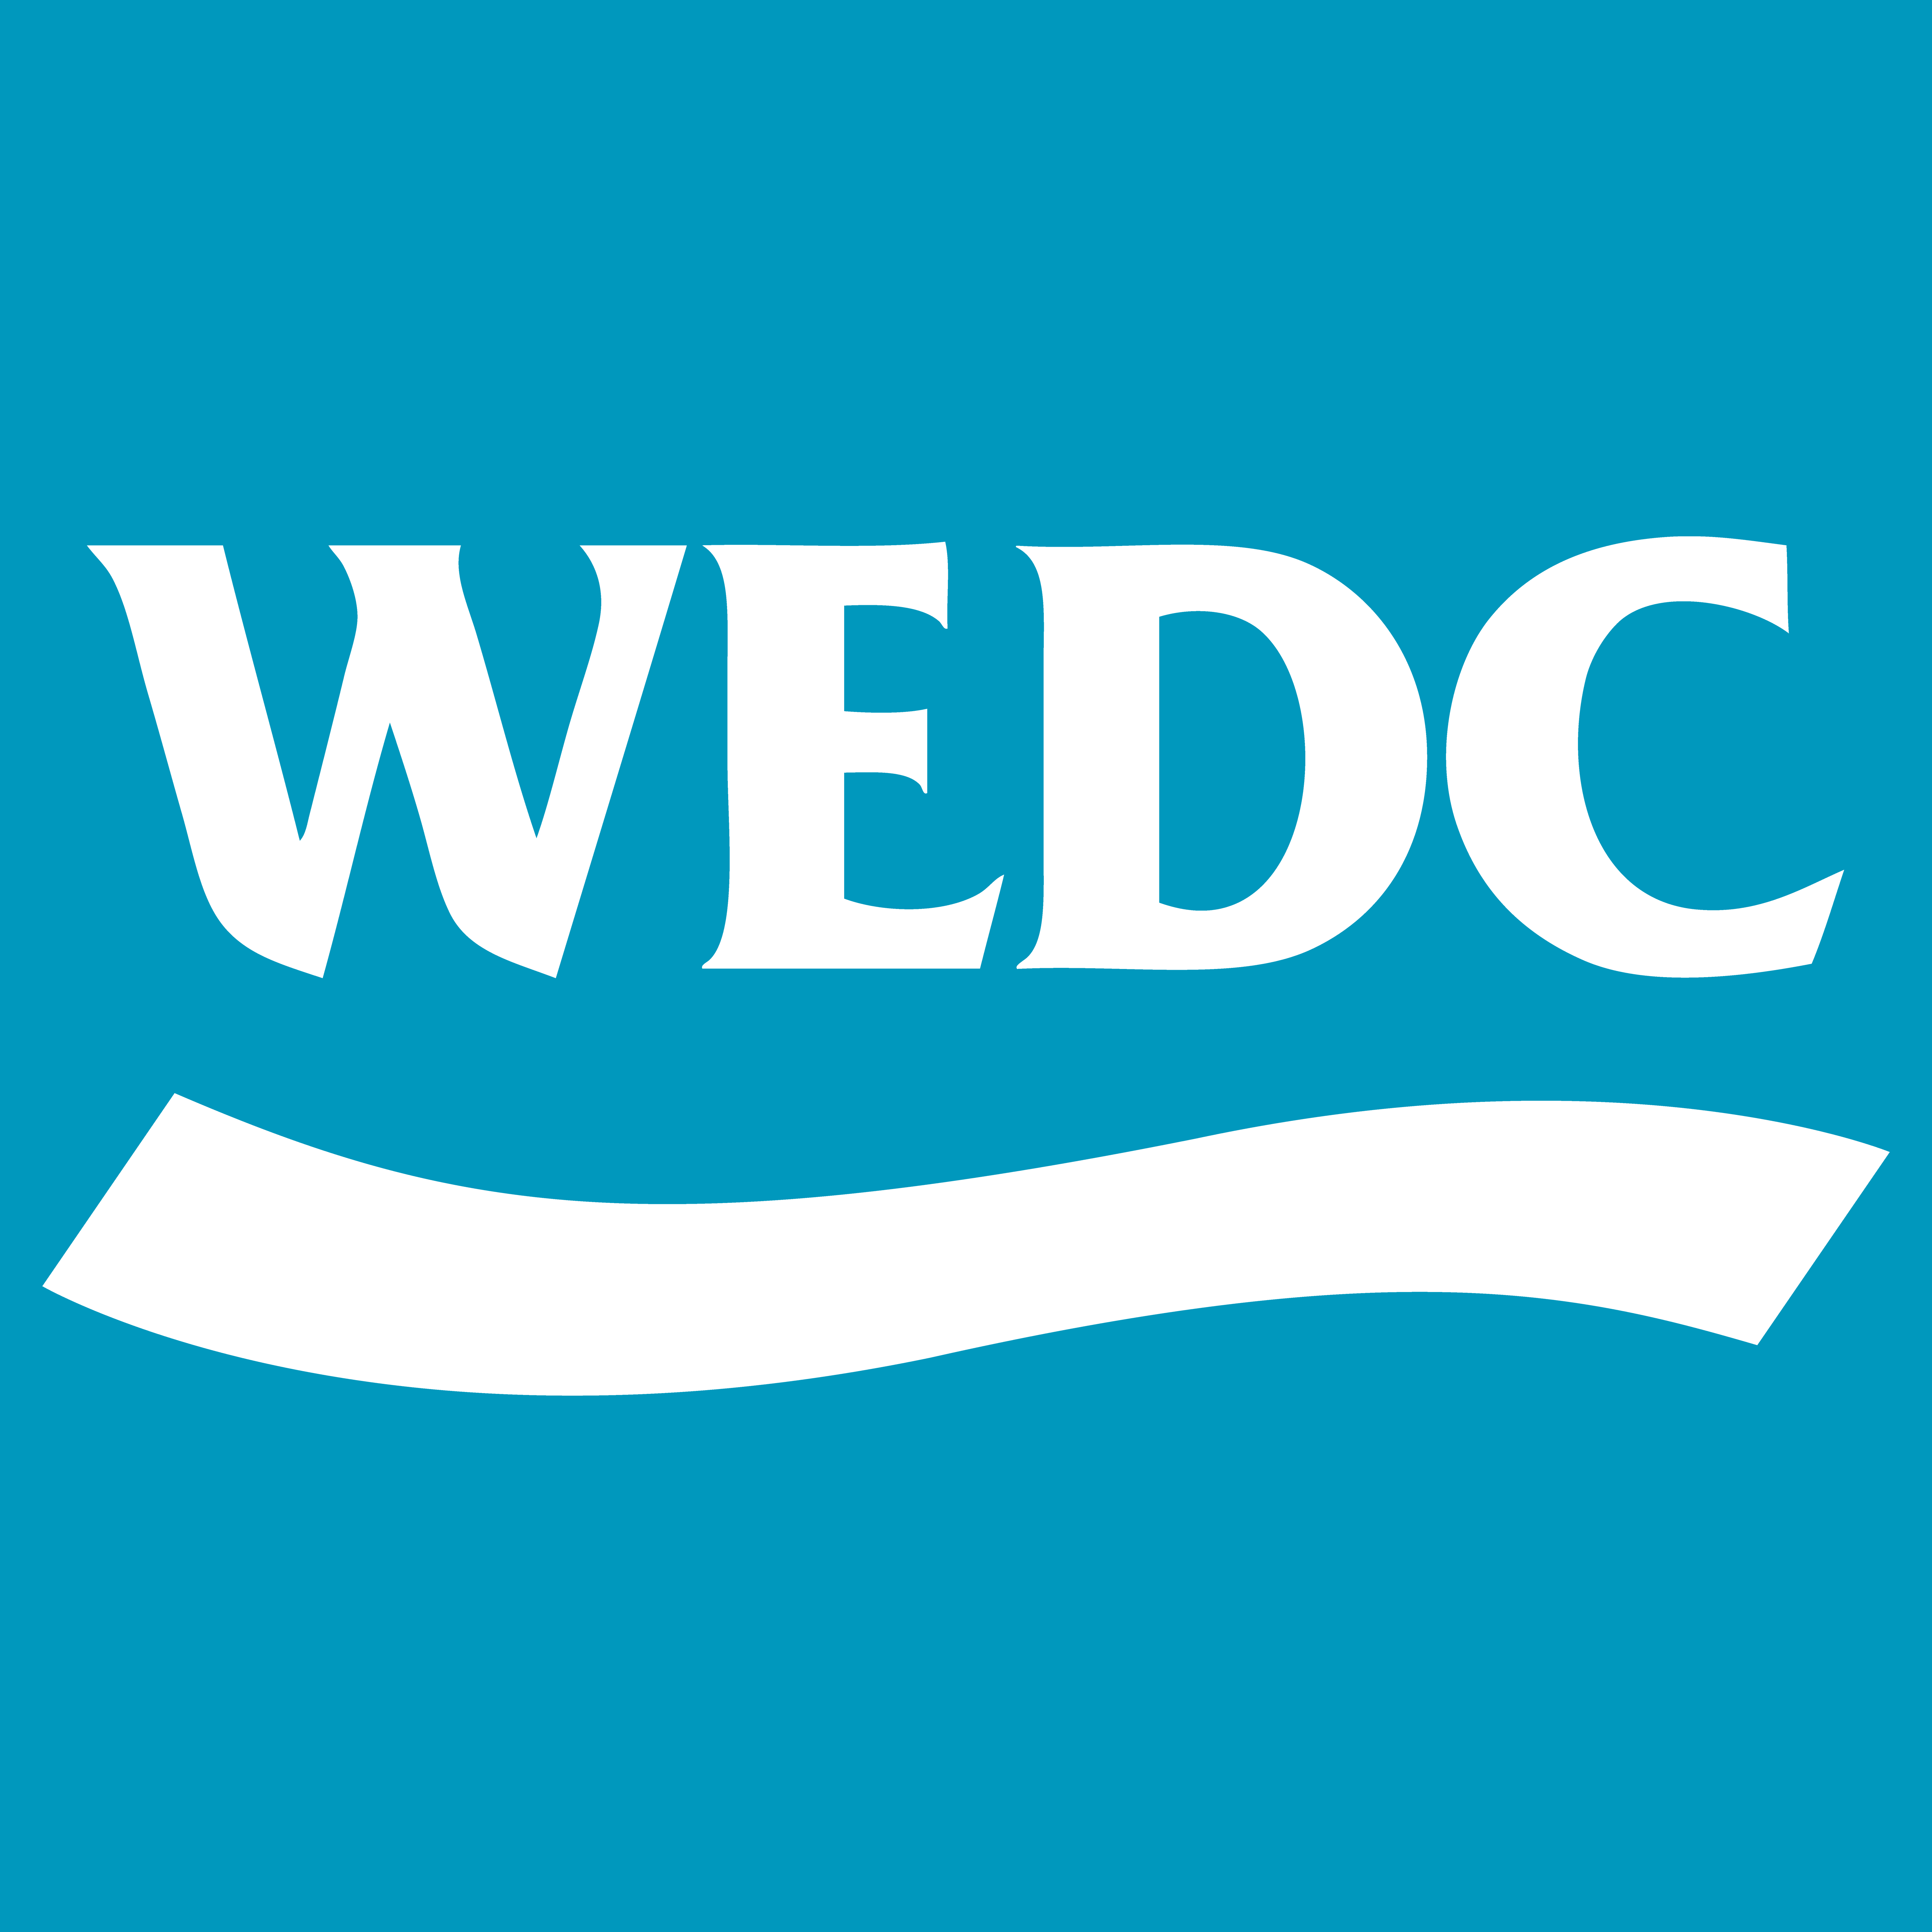 43rd WEDC International Conference: Water and Climate Resilience